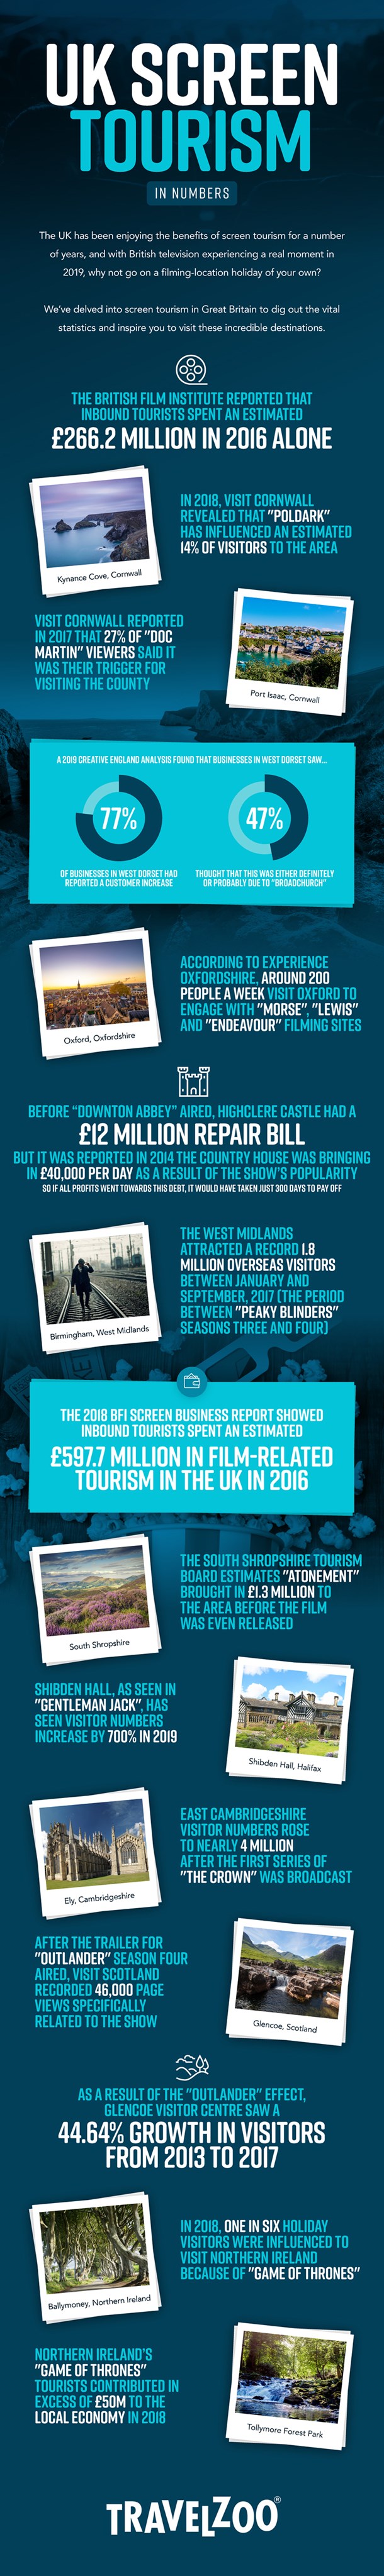 UK screen tourism in numbers